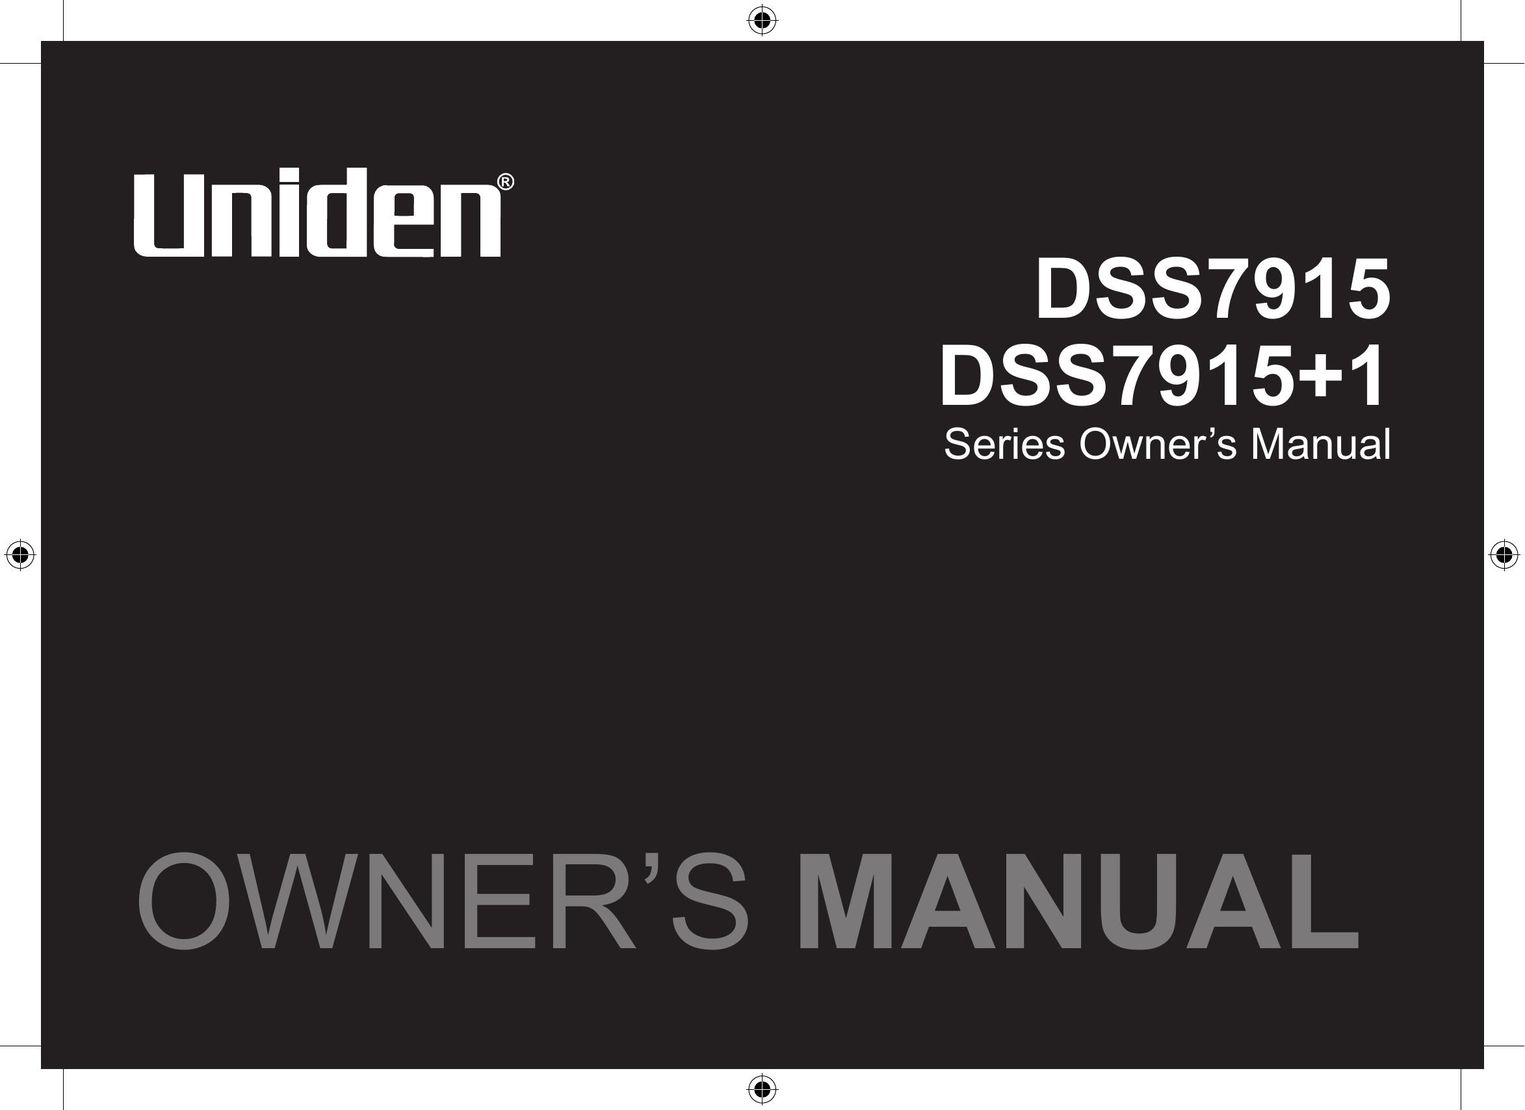 Uniden DSS7915+1 Telephone User Manual